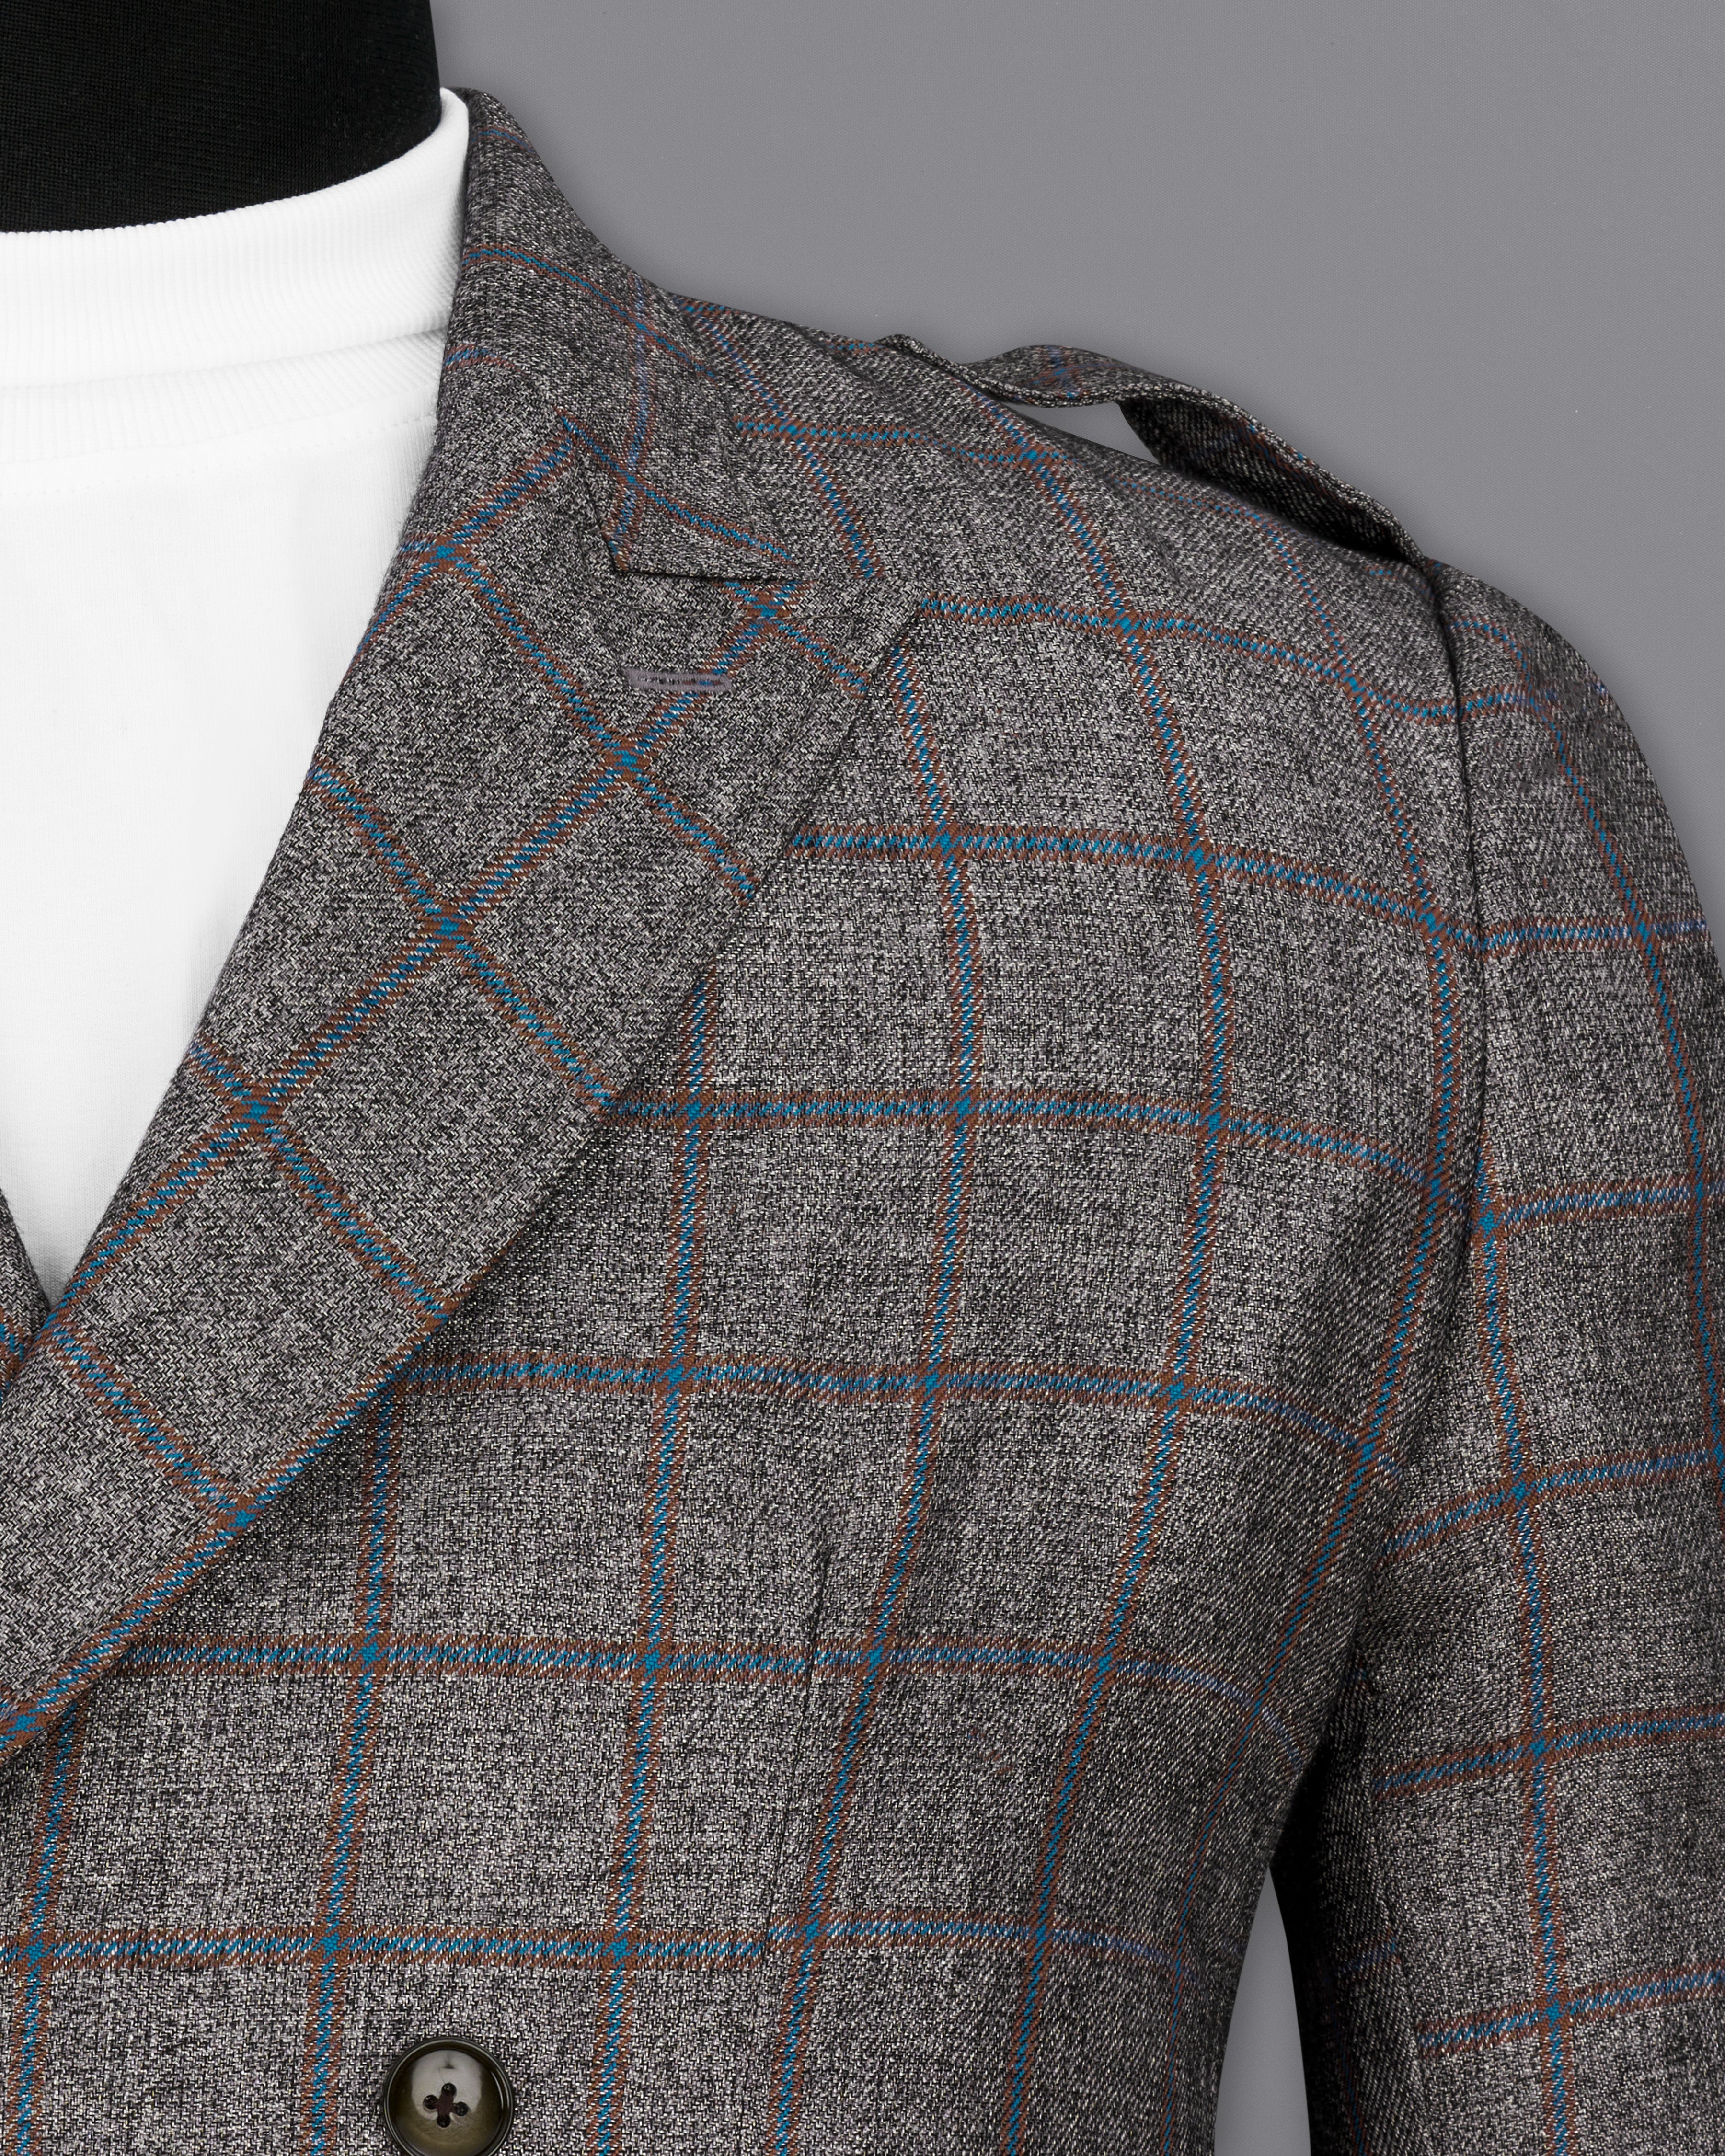 Fuscous Gray Windowpane Double Breasted Designer Trench Coat TCB2320-D202-36, TCB2320-D202-38, TCB2320-D202-40, TCB2320-D202-42, TCB2320-D202-44, TCB2320-D202-46, TCB2320-D202-48, TCB2320-D202-50, TCB2320-D202-52, TCB2320-D202-54, TCB2320-D202-56, TCB2320-D202-58, TCB2320-D202-60